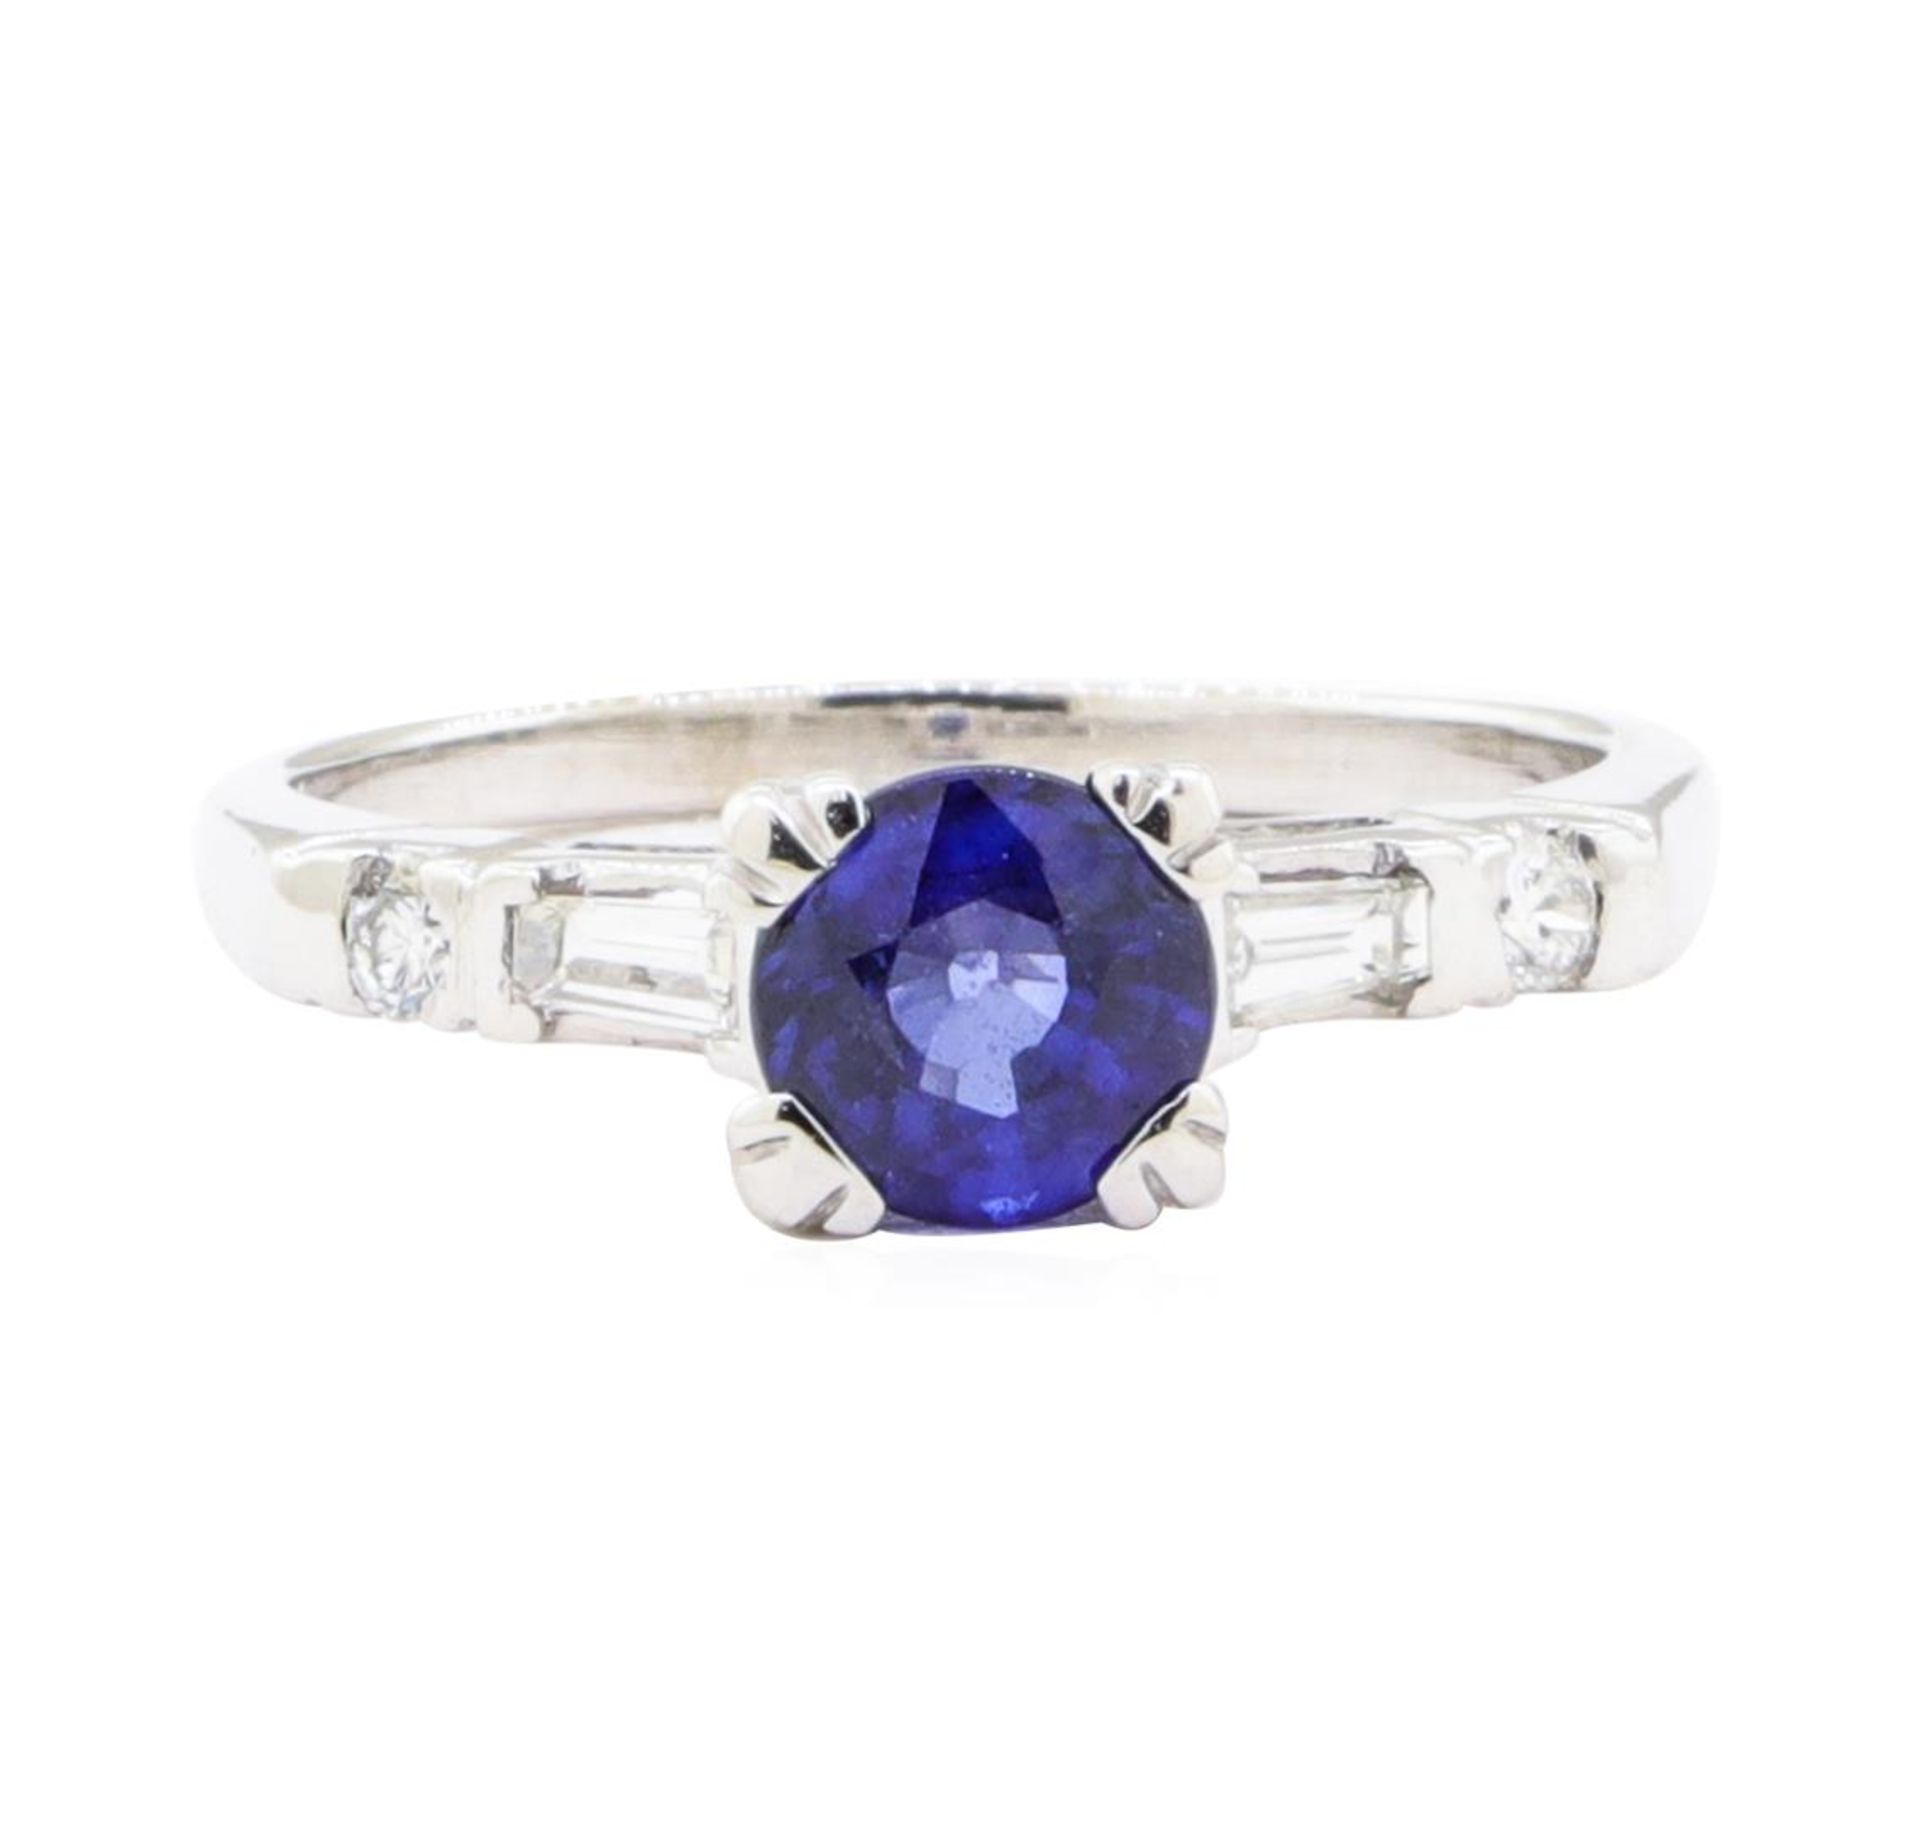 1.20 ctw Sapphire and Diamond Ring - 18KT White Gold - Image 2 of 4